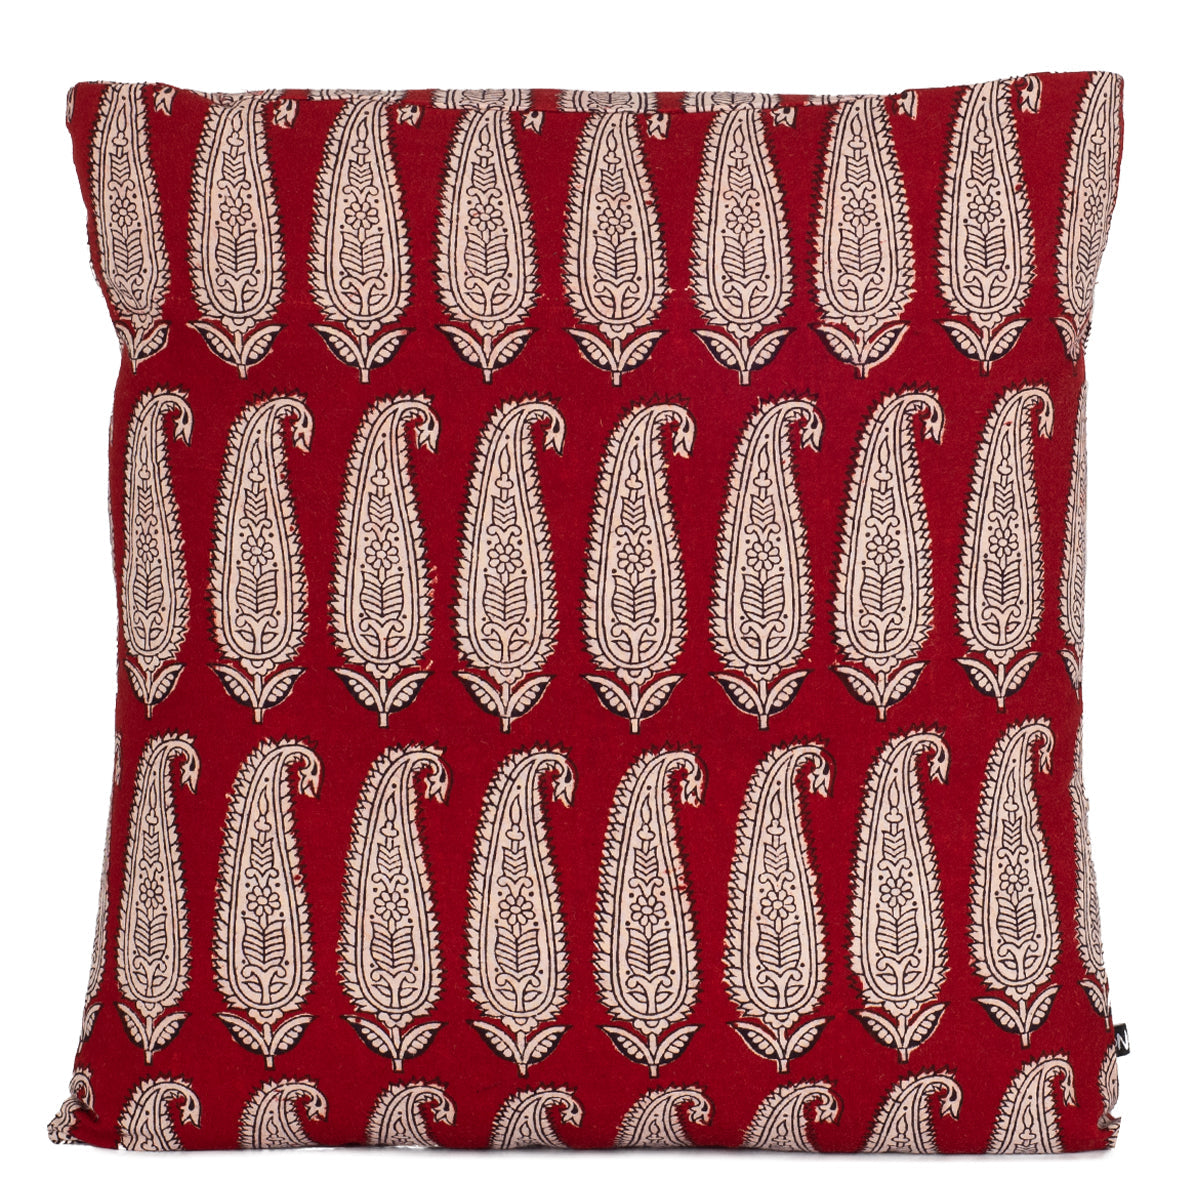 Paisley and Geometric Pattern Bagh Hand Block Print Cotton Cushion Cover - Red Black-3